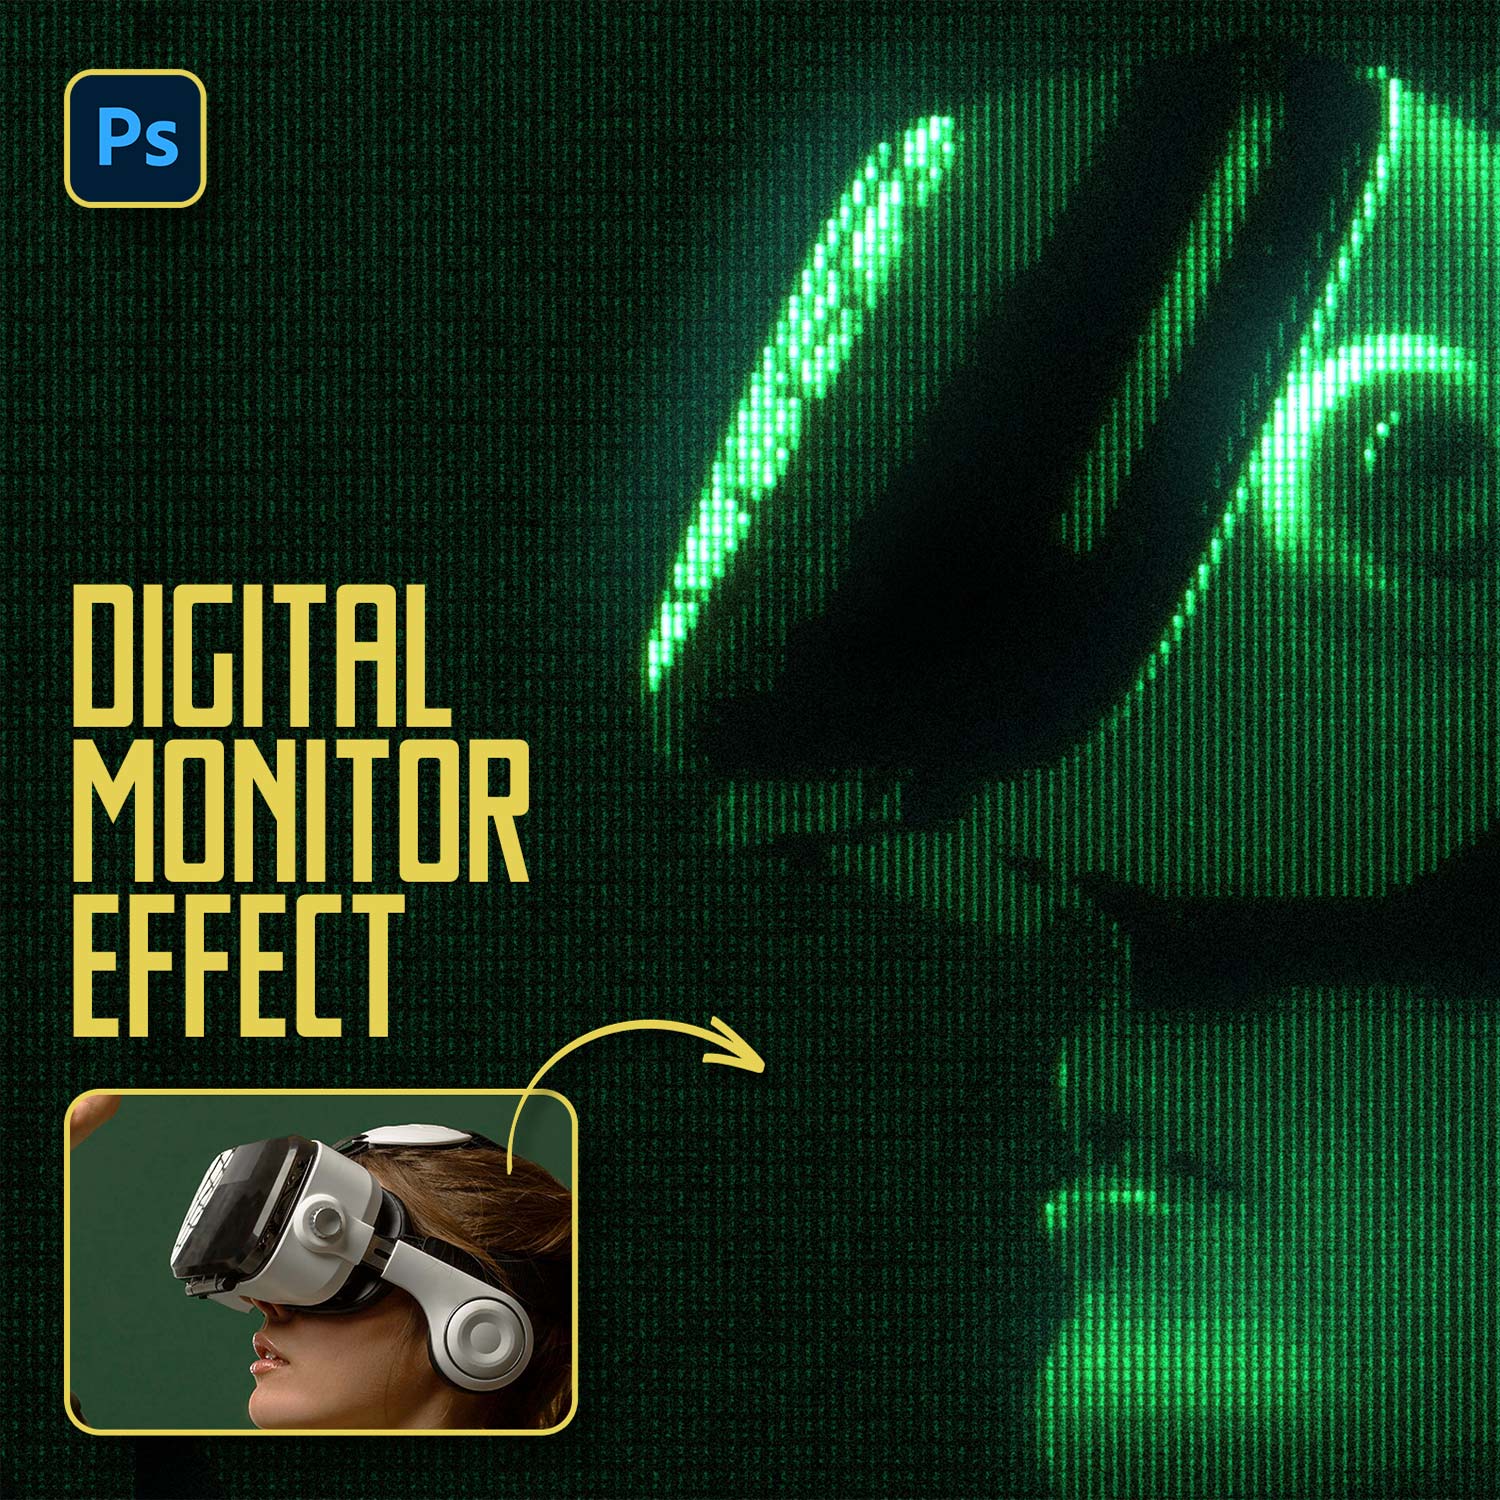 Digital Monitor Photo Effect cover image.